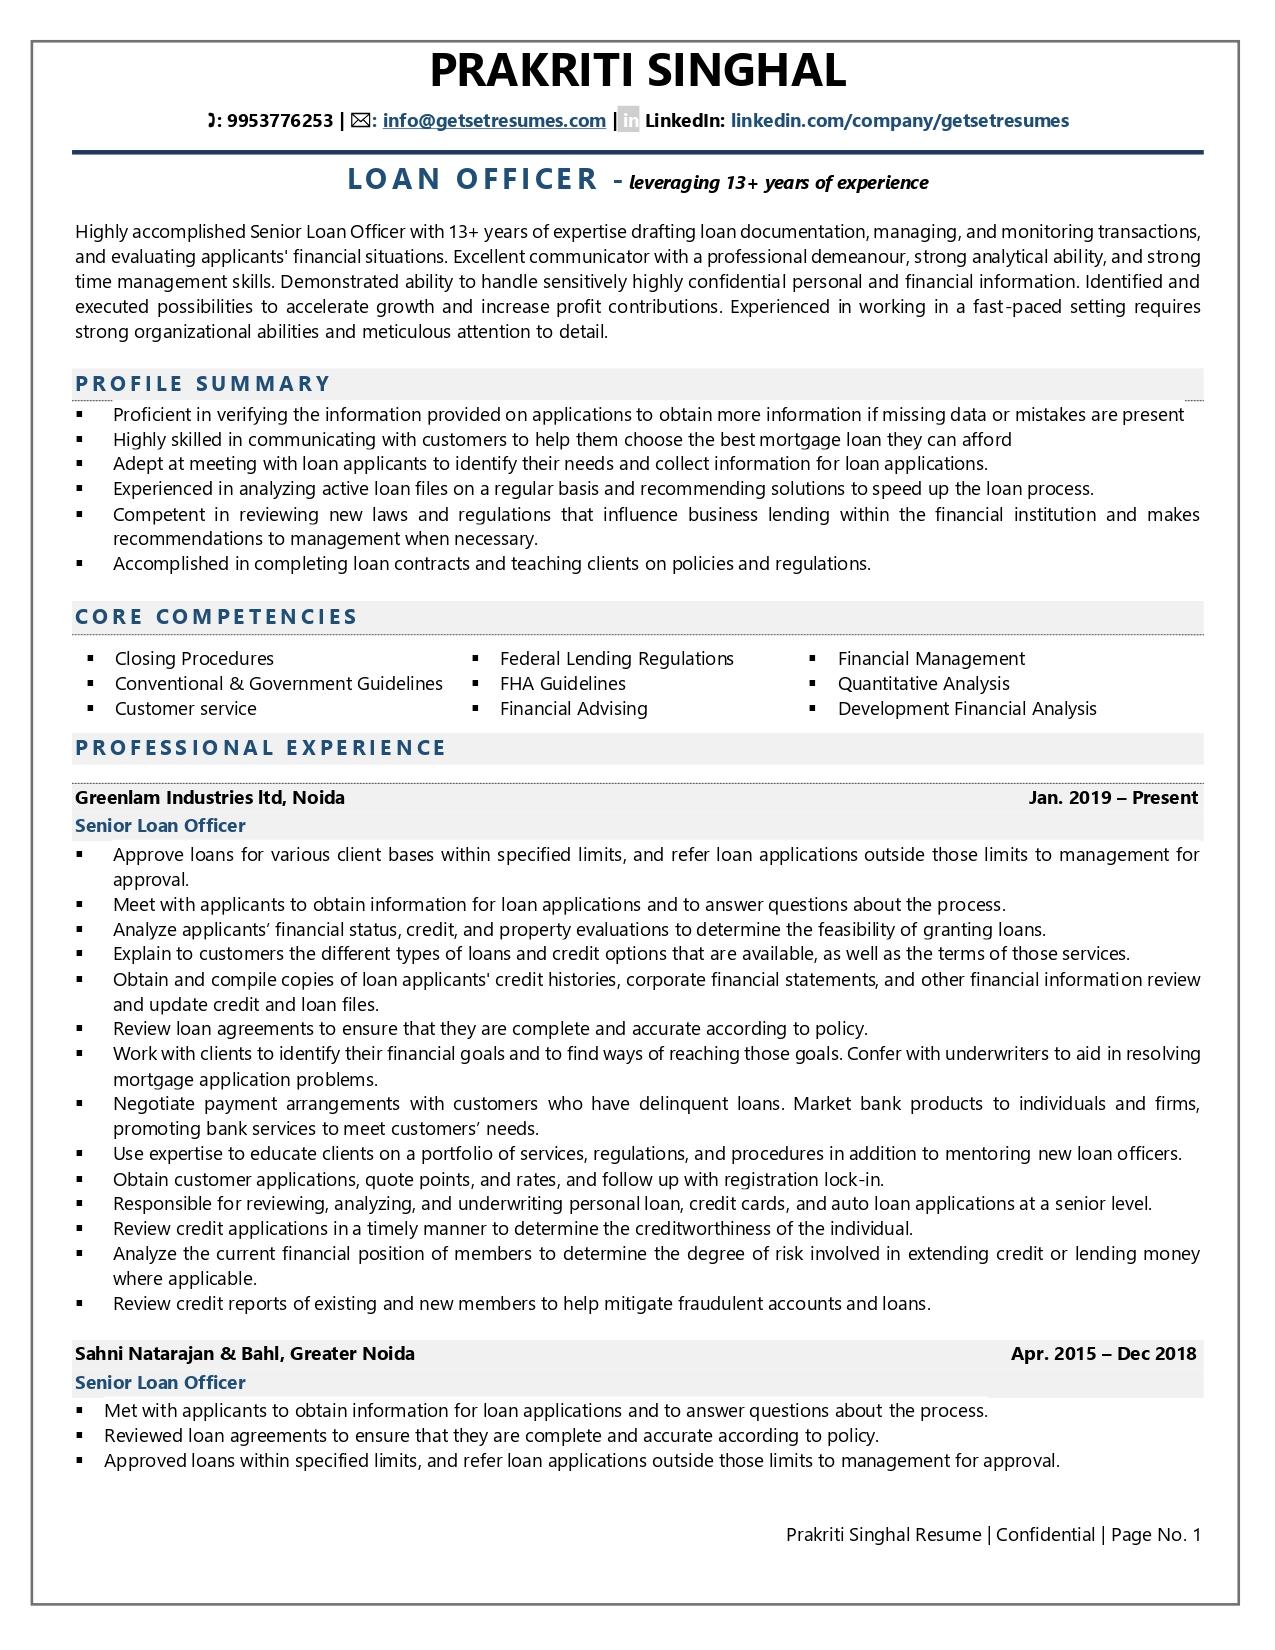 Loan Officer Resume Examples & Template (with job winning tips)